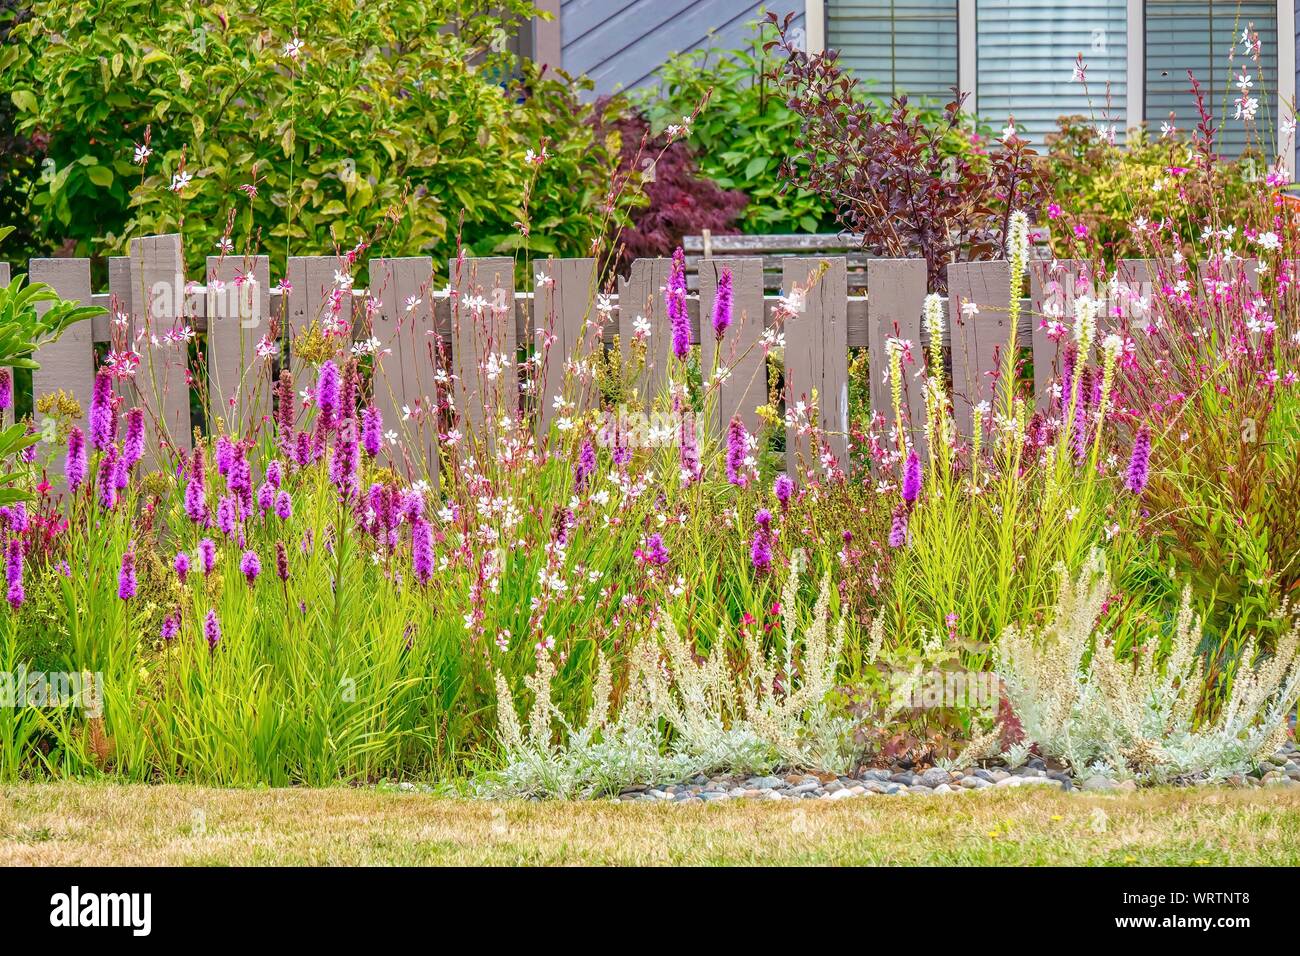 A pretty, ornamental garden blooming with purple flowers, in front of a wooden fence in a suburban neighborhood in Vancouver, Canada. Stock Photo